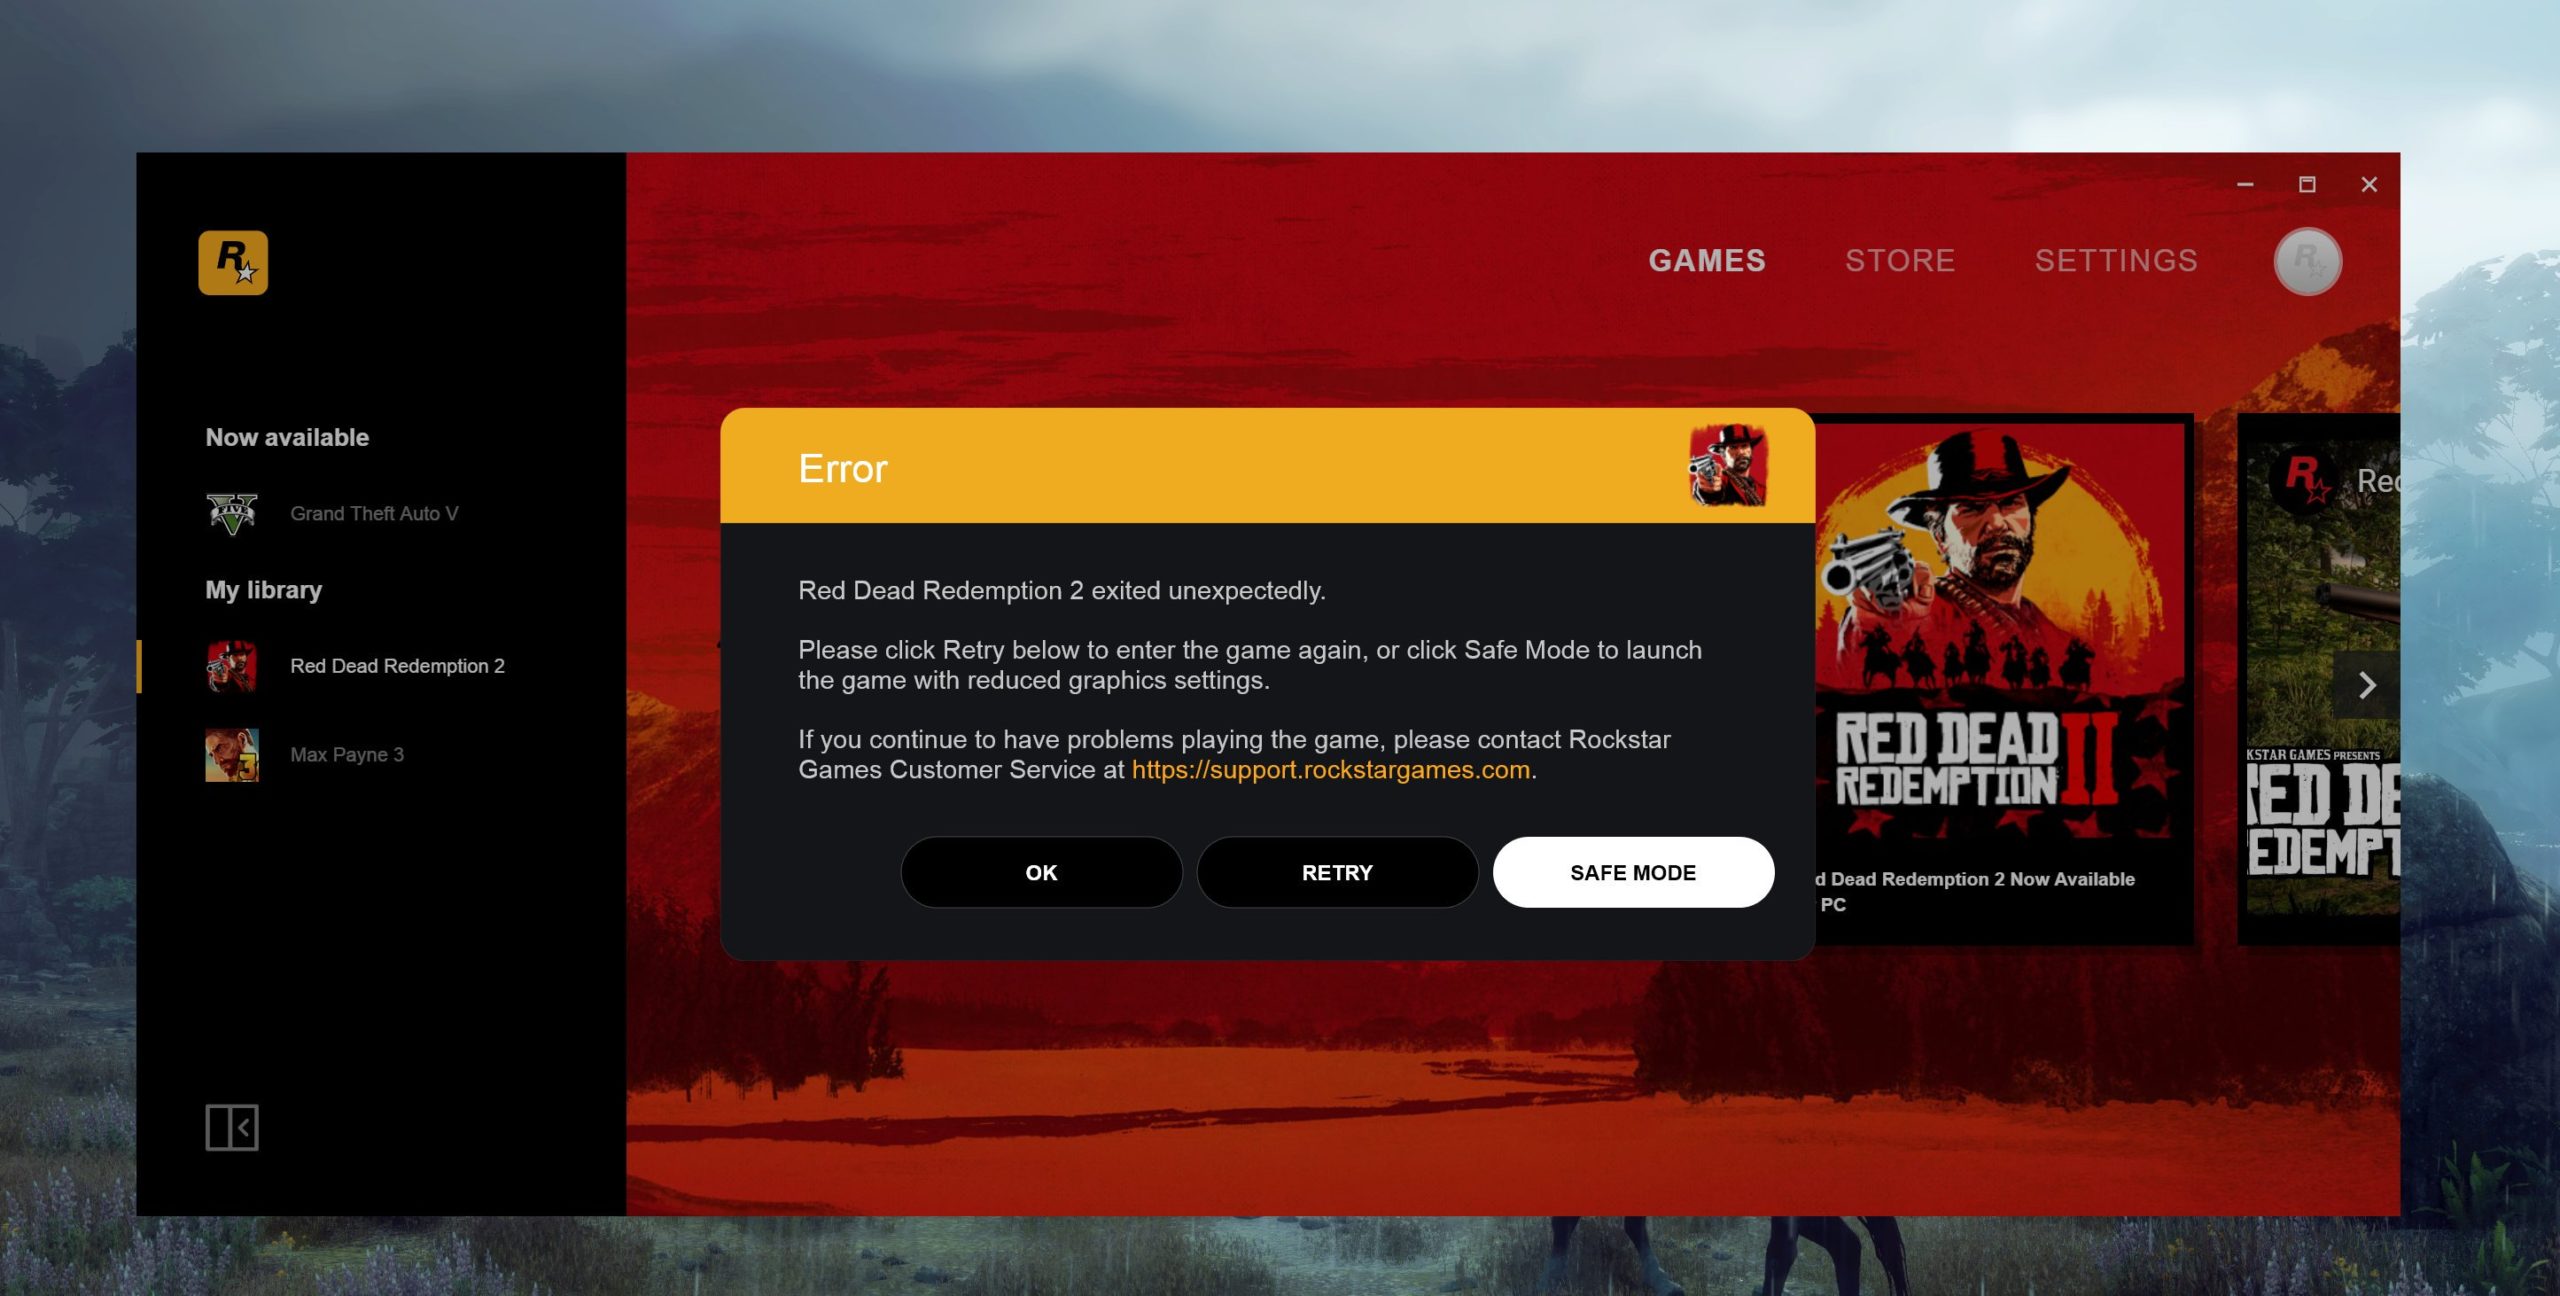 rockstar game launcher failed to initialize